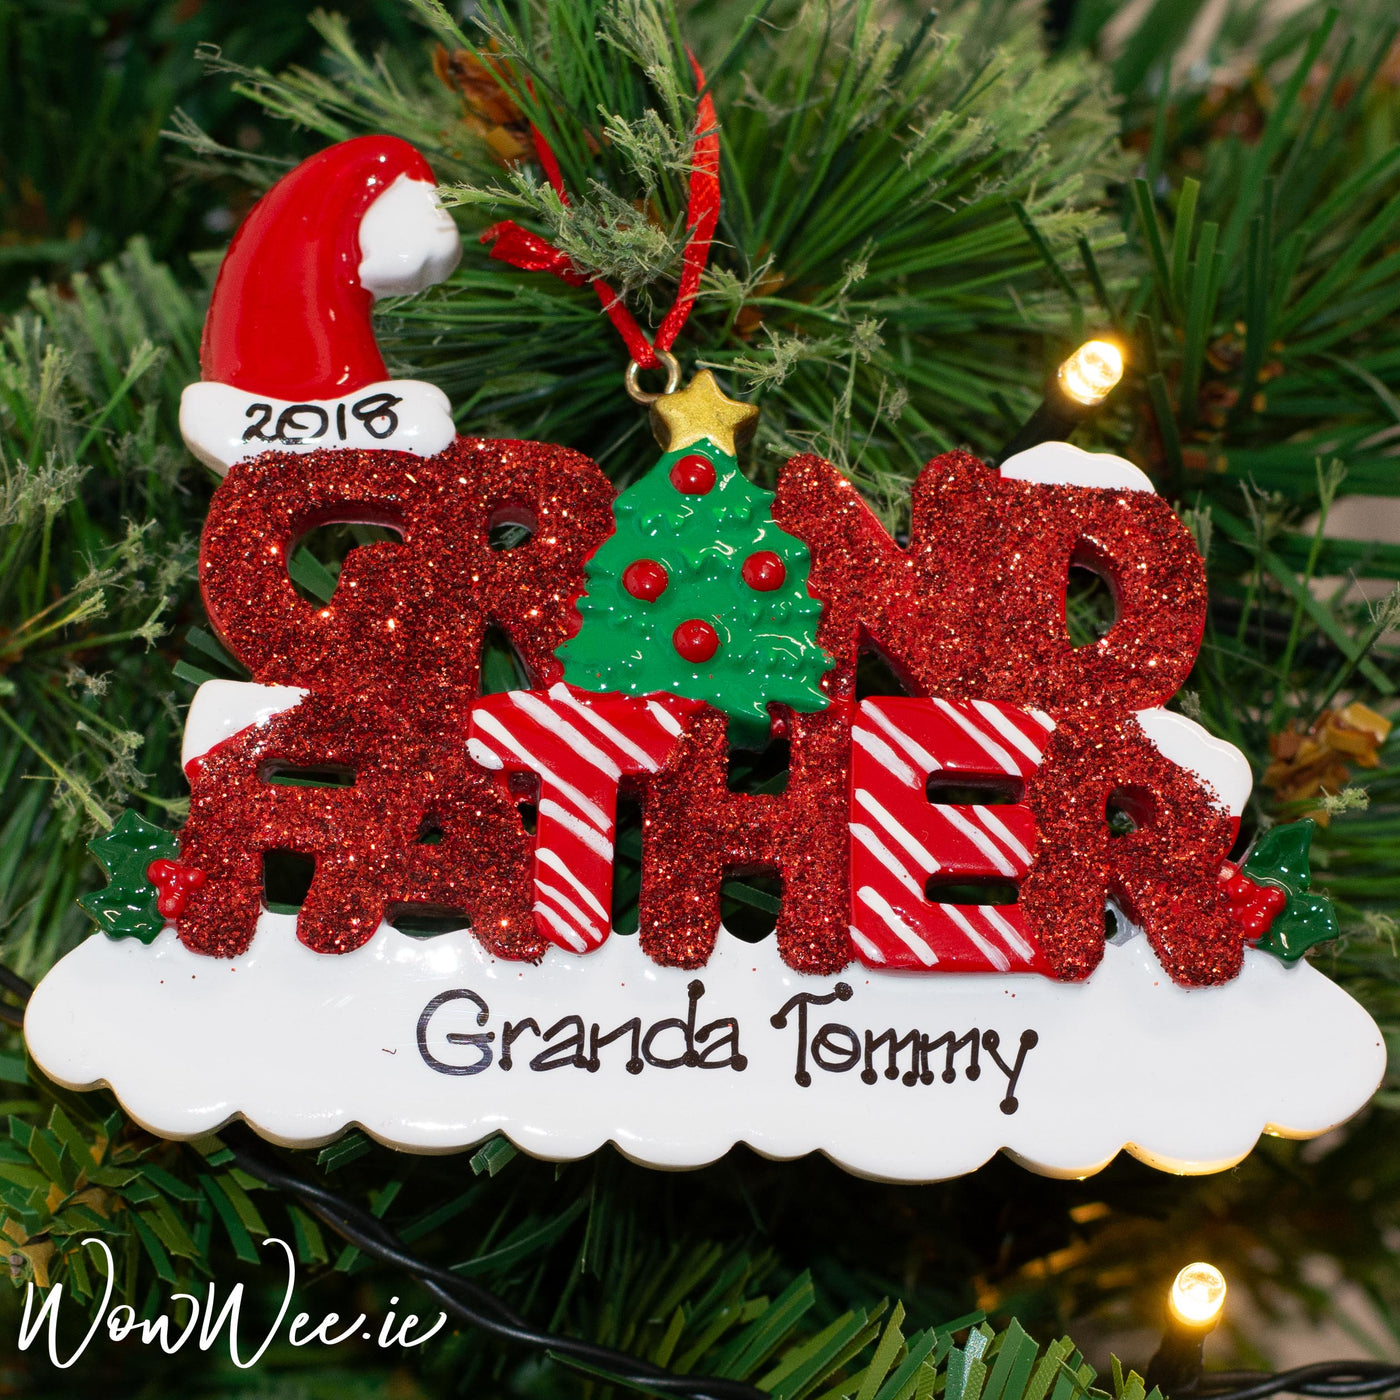 Personalised Christmas Ornament for a special Grandad. Specially personalised for a Grandad celebrating his first Christmas with hi precious Grandson or Granddaughter